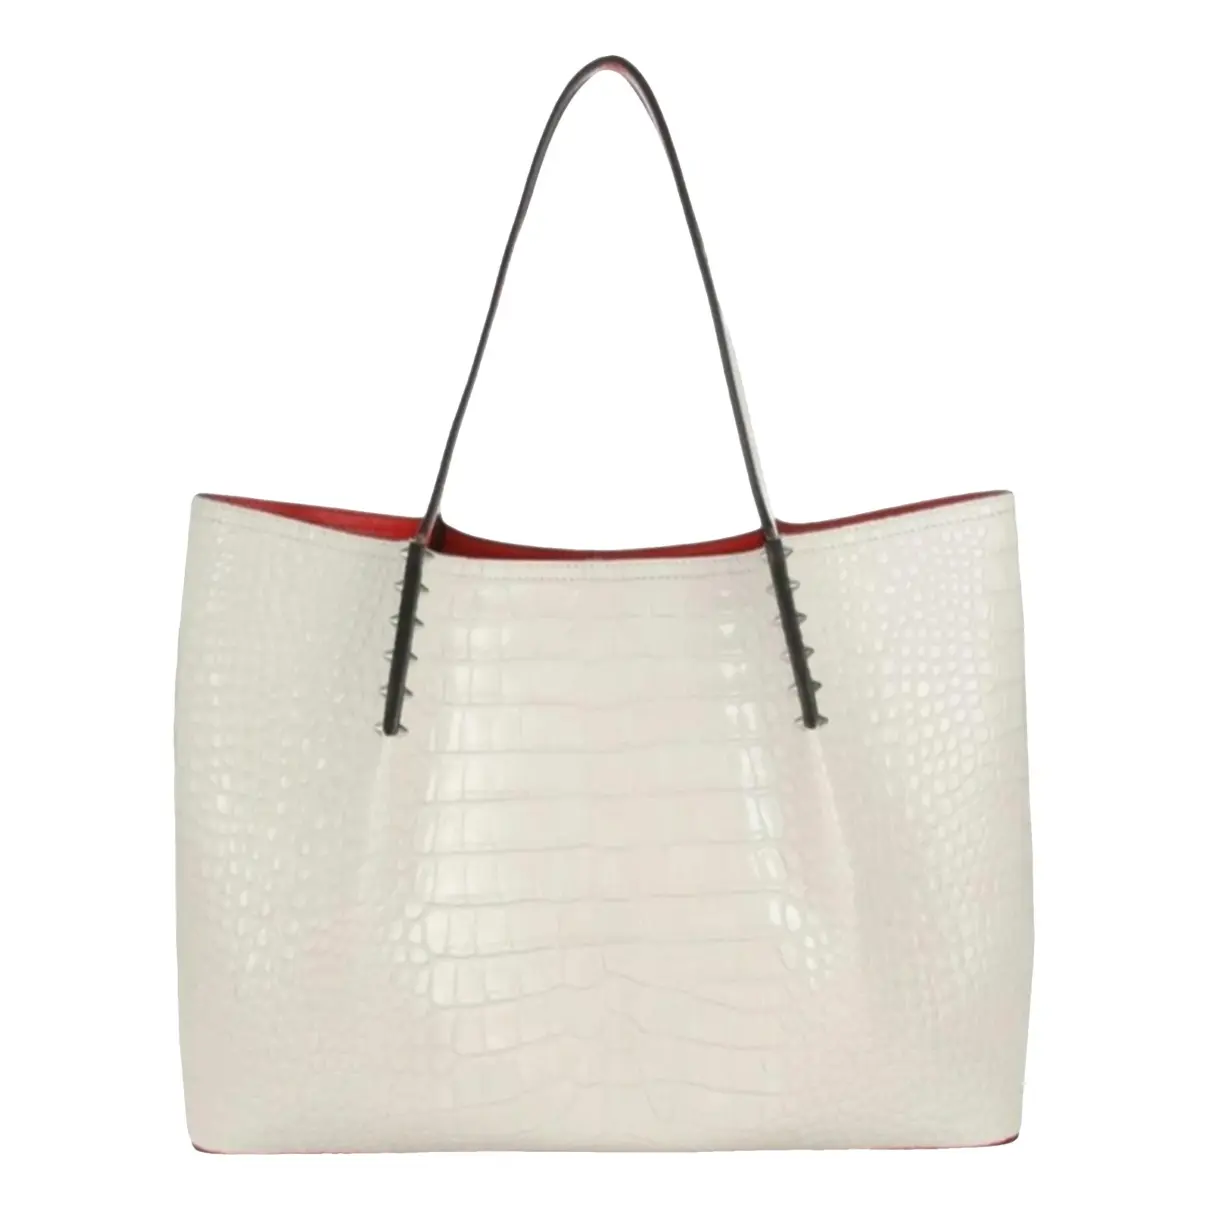 Cabarock patent leather tote